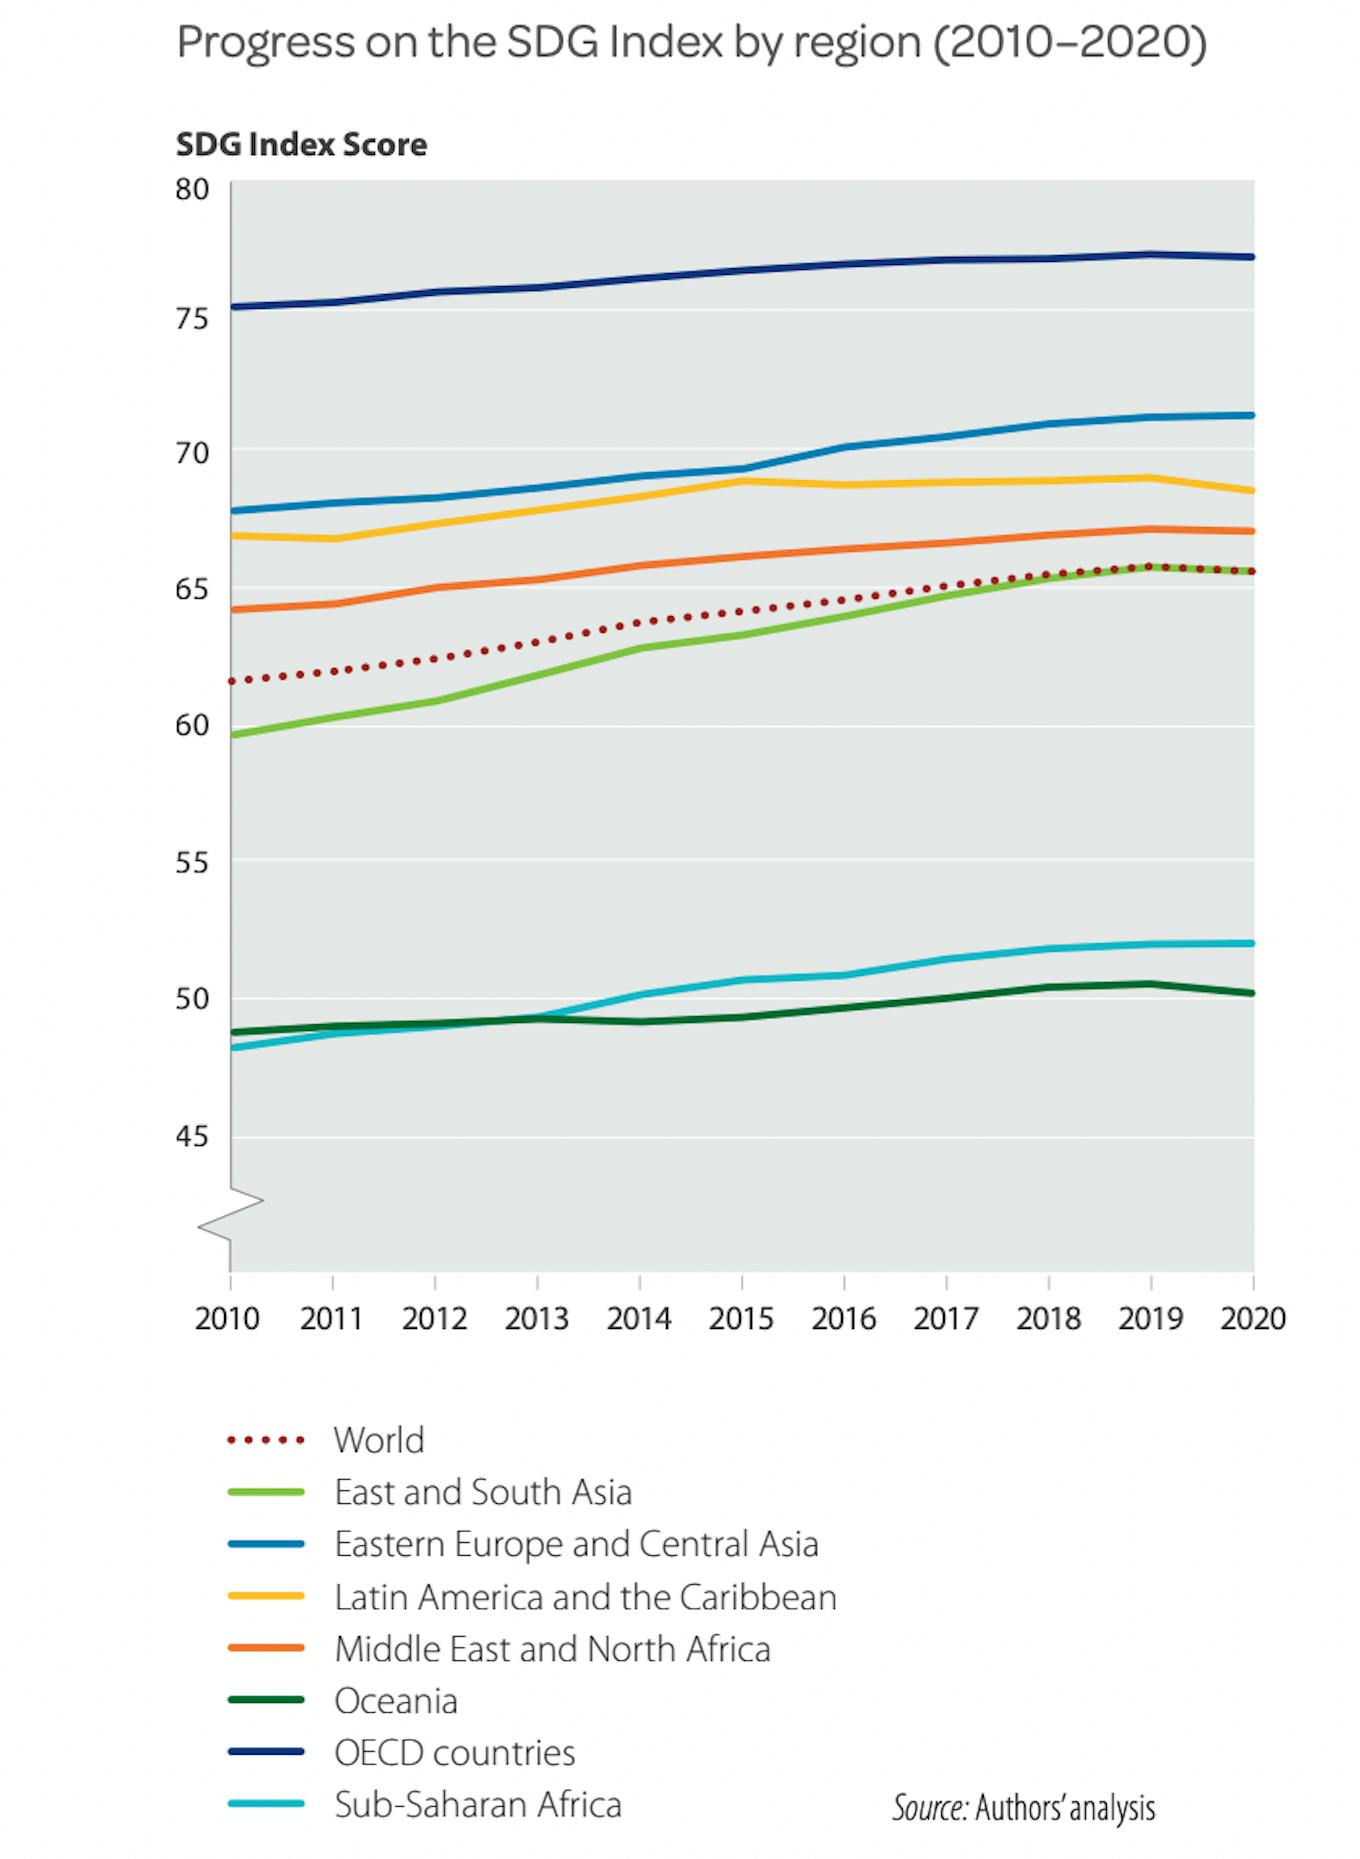 Progress on the SDG Index by region (2010–2020). Source: 2021 Sustainable Development Report